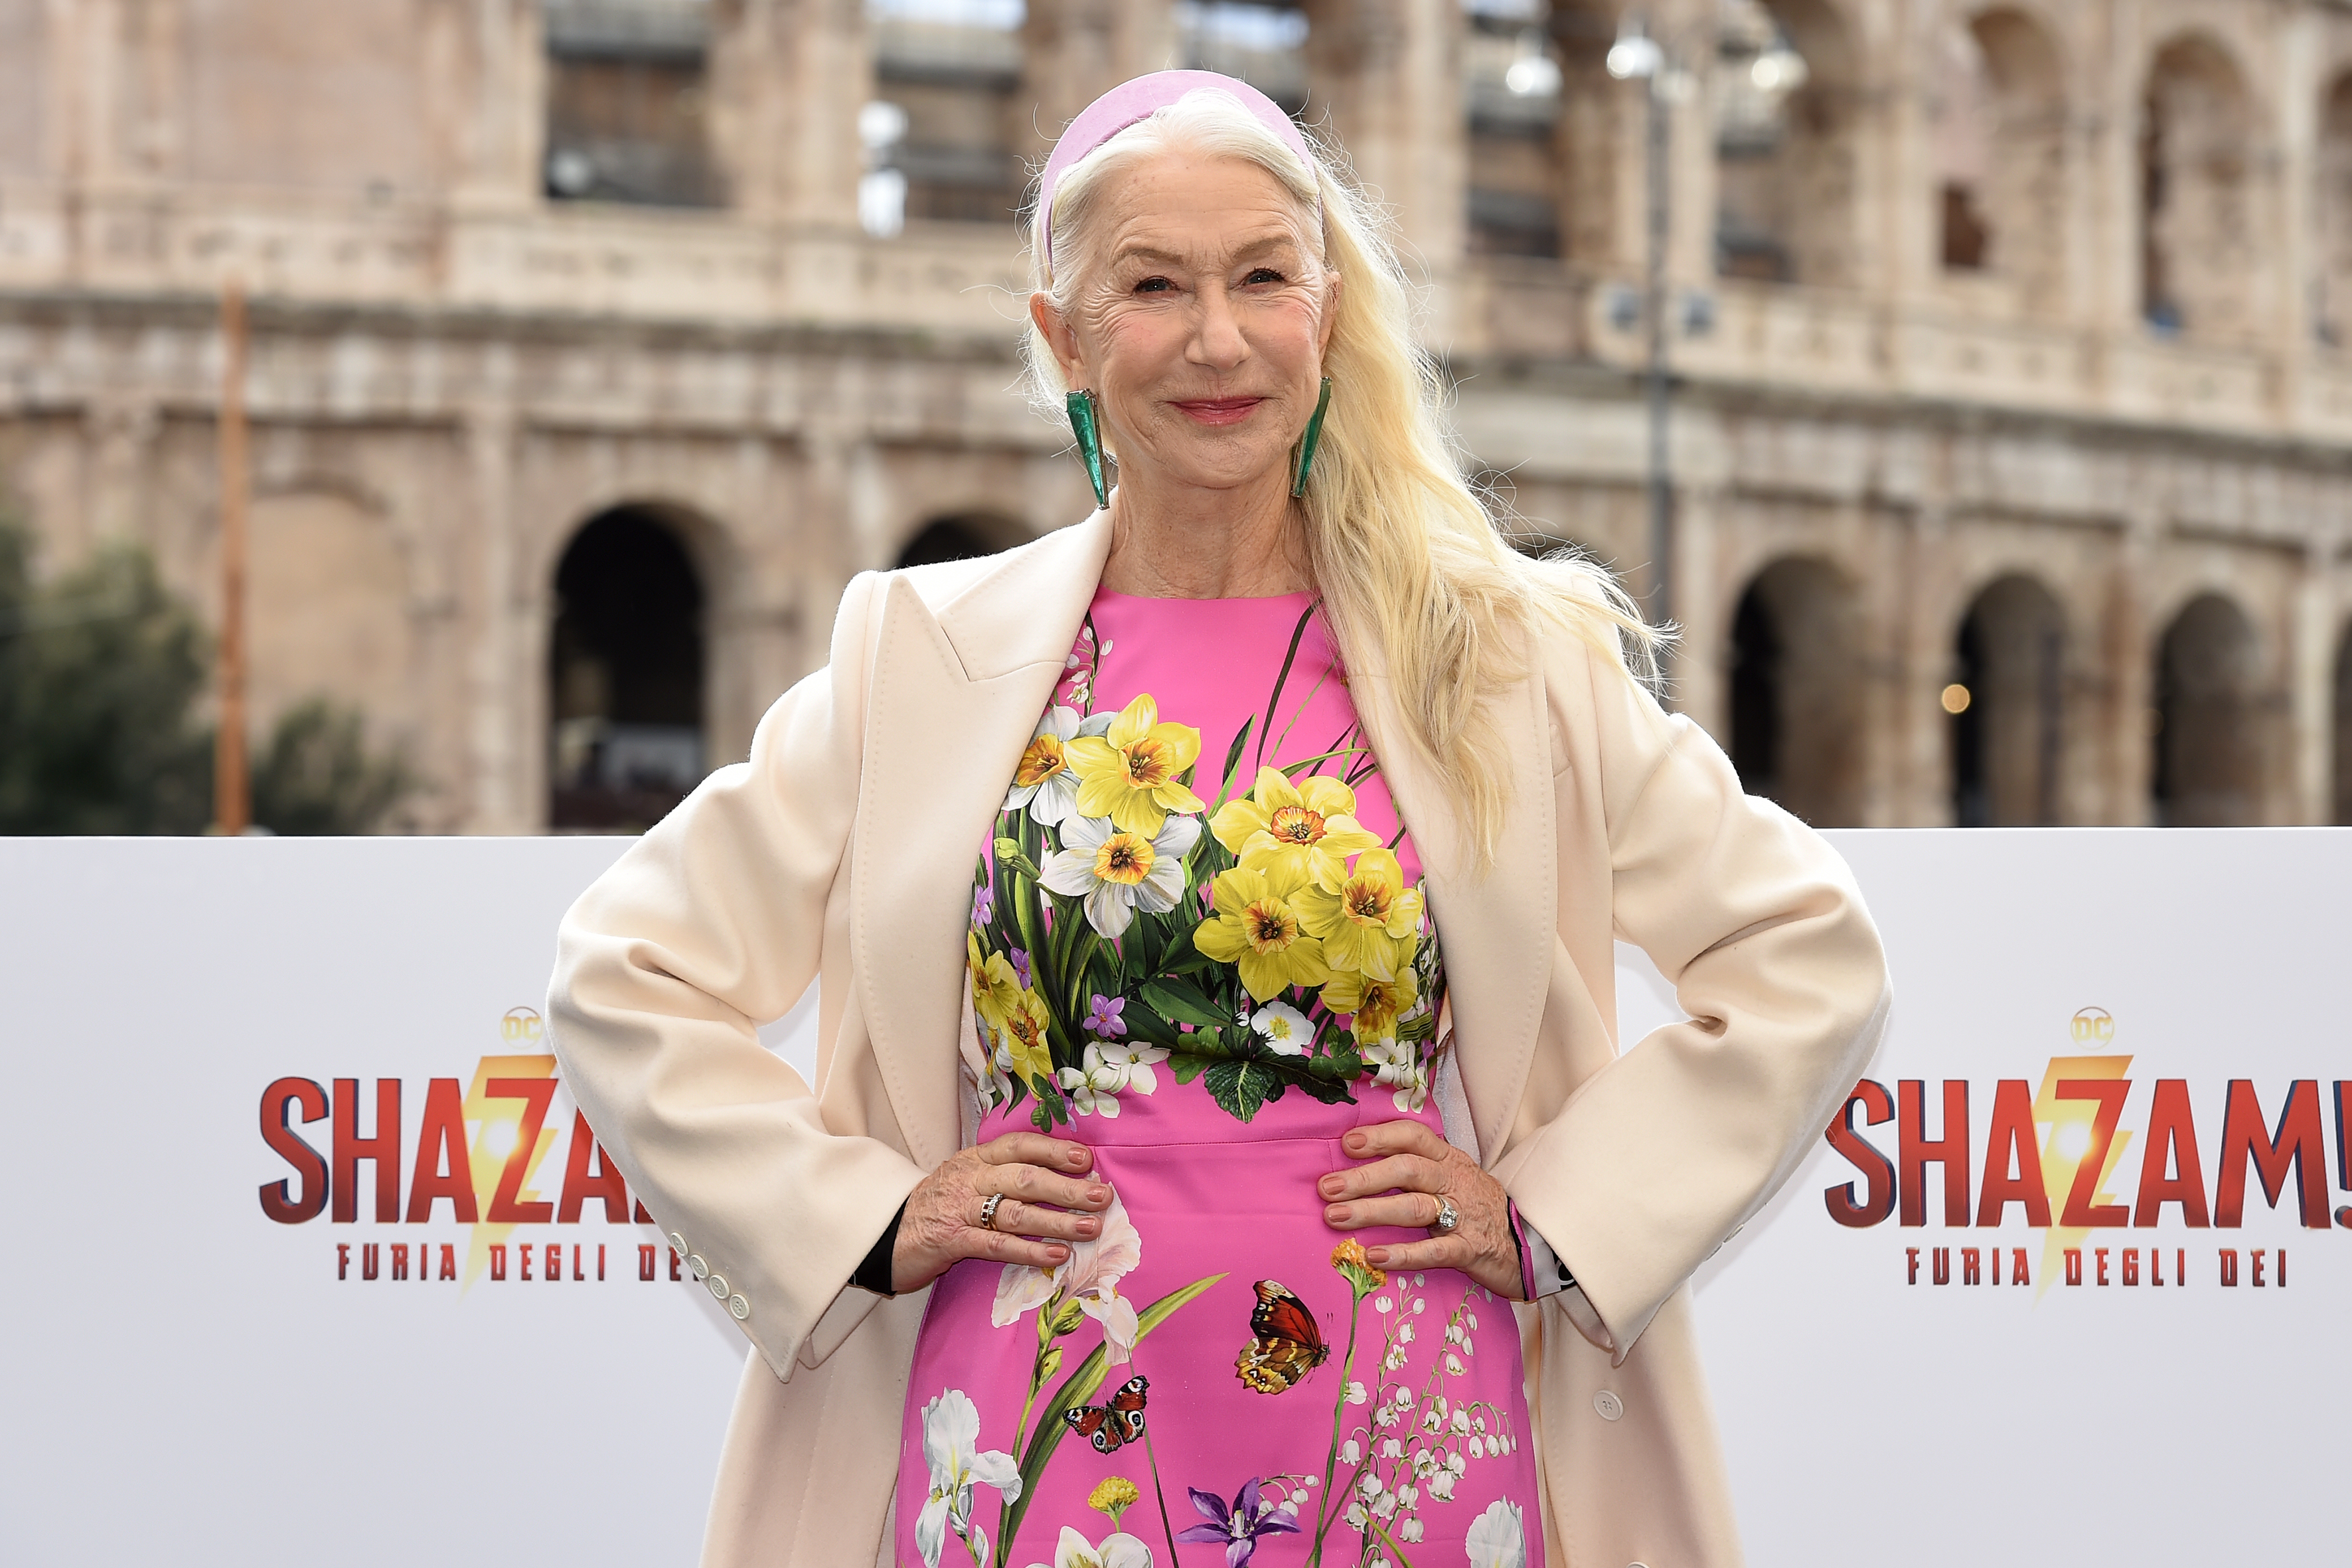 Helen Mirren participates in the photocall of the film "Shazam! Fury of the Gods" at Palazzo Manfredi in front of the Colosseum in Rome, Italy, on March 2, 2023. | Source: Getty Images